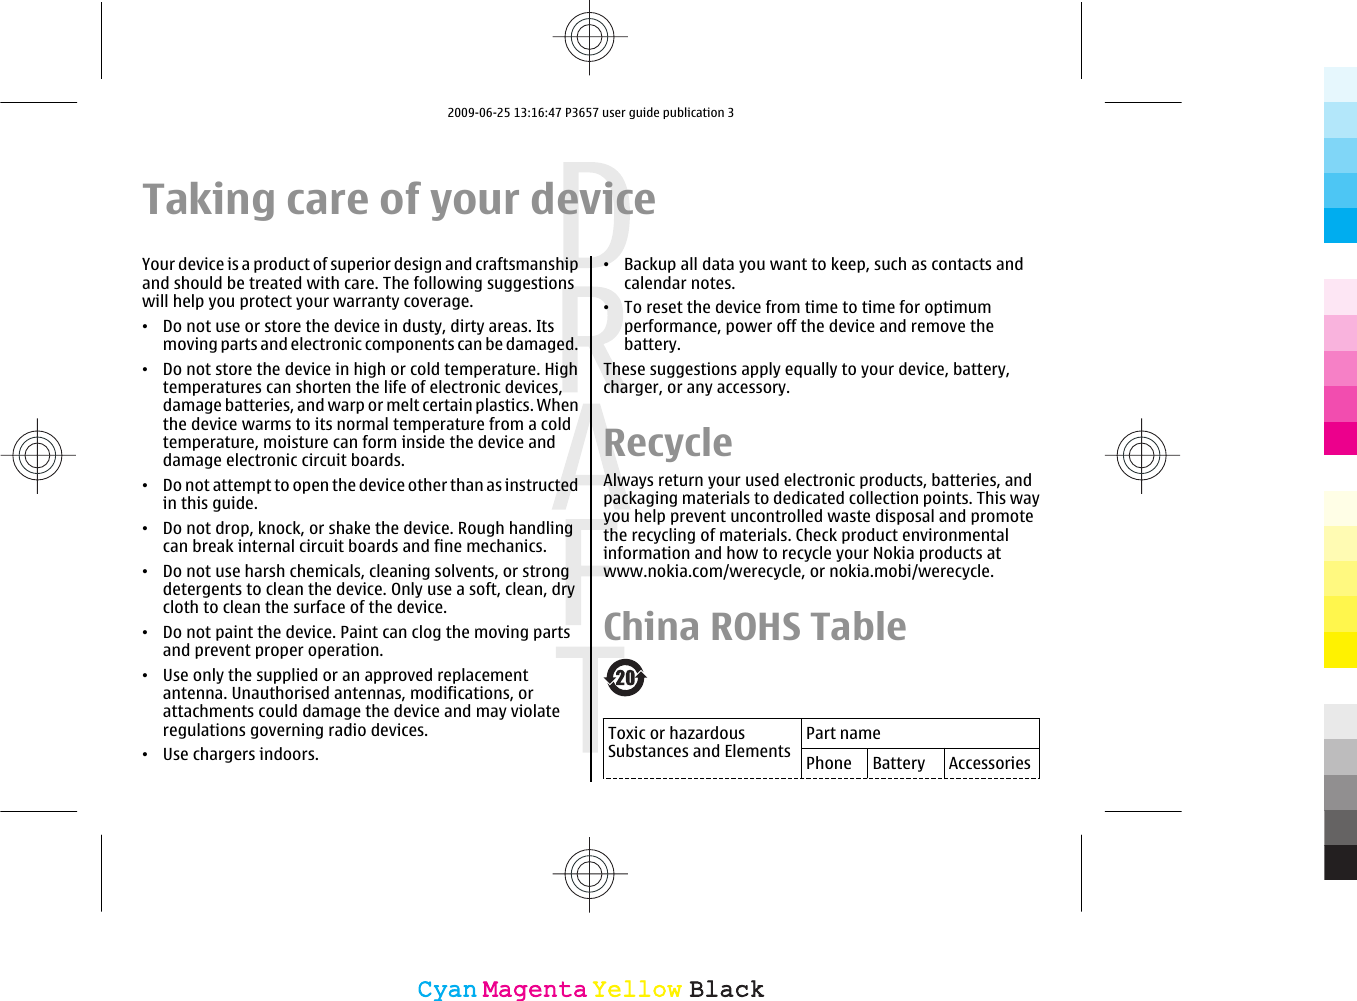 Taking care of your deviceYour device is a product of superior design and craftsmanshipand should be treated with care. The following suggestionswill help you protect your warranty coverage.•Do not use or store the device in dusty, dirty areas. Itsmoving parts and electronic components can be damaged.•Do not store the device in high or cold temperature. Hightemperatures can shorten the life of electronic devices,damage batteries, and warp or melt certain plastics. Whenthe device warms to its normal temperature from a coldtemperature, moisture can form inside the device anddamage electronic circuit boards.•Do not attempt to open the device other than as instructedin this guide.•Do not drop, knock, or shake the device. Rough handlingcan break internal circuit boards and fine mechanics.•Do not use harsh chemicals, cleaning solvents, or strongdetergents to clean the device. Only use a soft, clean, drycloth to clean the surface of the device.•Do not paint the device. Paint can clog the moving partsand prevent proper operation.•Use only the supplied or an approved replacementantenna. Unauthorised antennas, modifications, orattachments could damage the device and may violateregulations governing radio devices.•Use chargers indoors.•Backup all data you want to keep, such as contacts andcalendar notes.•To reset the device from time to time for optimumperformance, power off the device and remove thebattery.These suggestions apply equally to your device, battery,charger, or any accessory.RecycleAlways return your used electronic products, batteries, andpackaging materials to dedicated collection points. This wayyou help prevent uncontrolled waste disposal and promotethe recycling of materials. Check product environmentalinformation and how to recycle your Nokia products atwww.nokia.com/werecycle, or nokia.mobi/werecycle.China ROHS TableToxic or hazardousSubstances and ElementsPart namePhone Battery AccessoriesCyanCyanMagentaMagentaYellowYellowBlackBlack2009-06-25 13:16:47 P3657 user guide publication 3